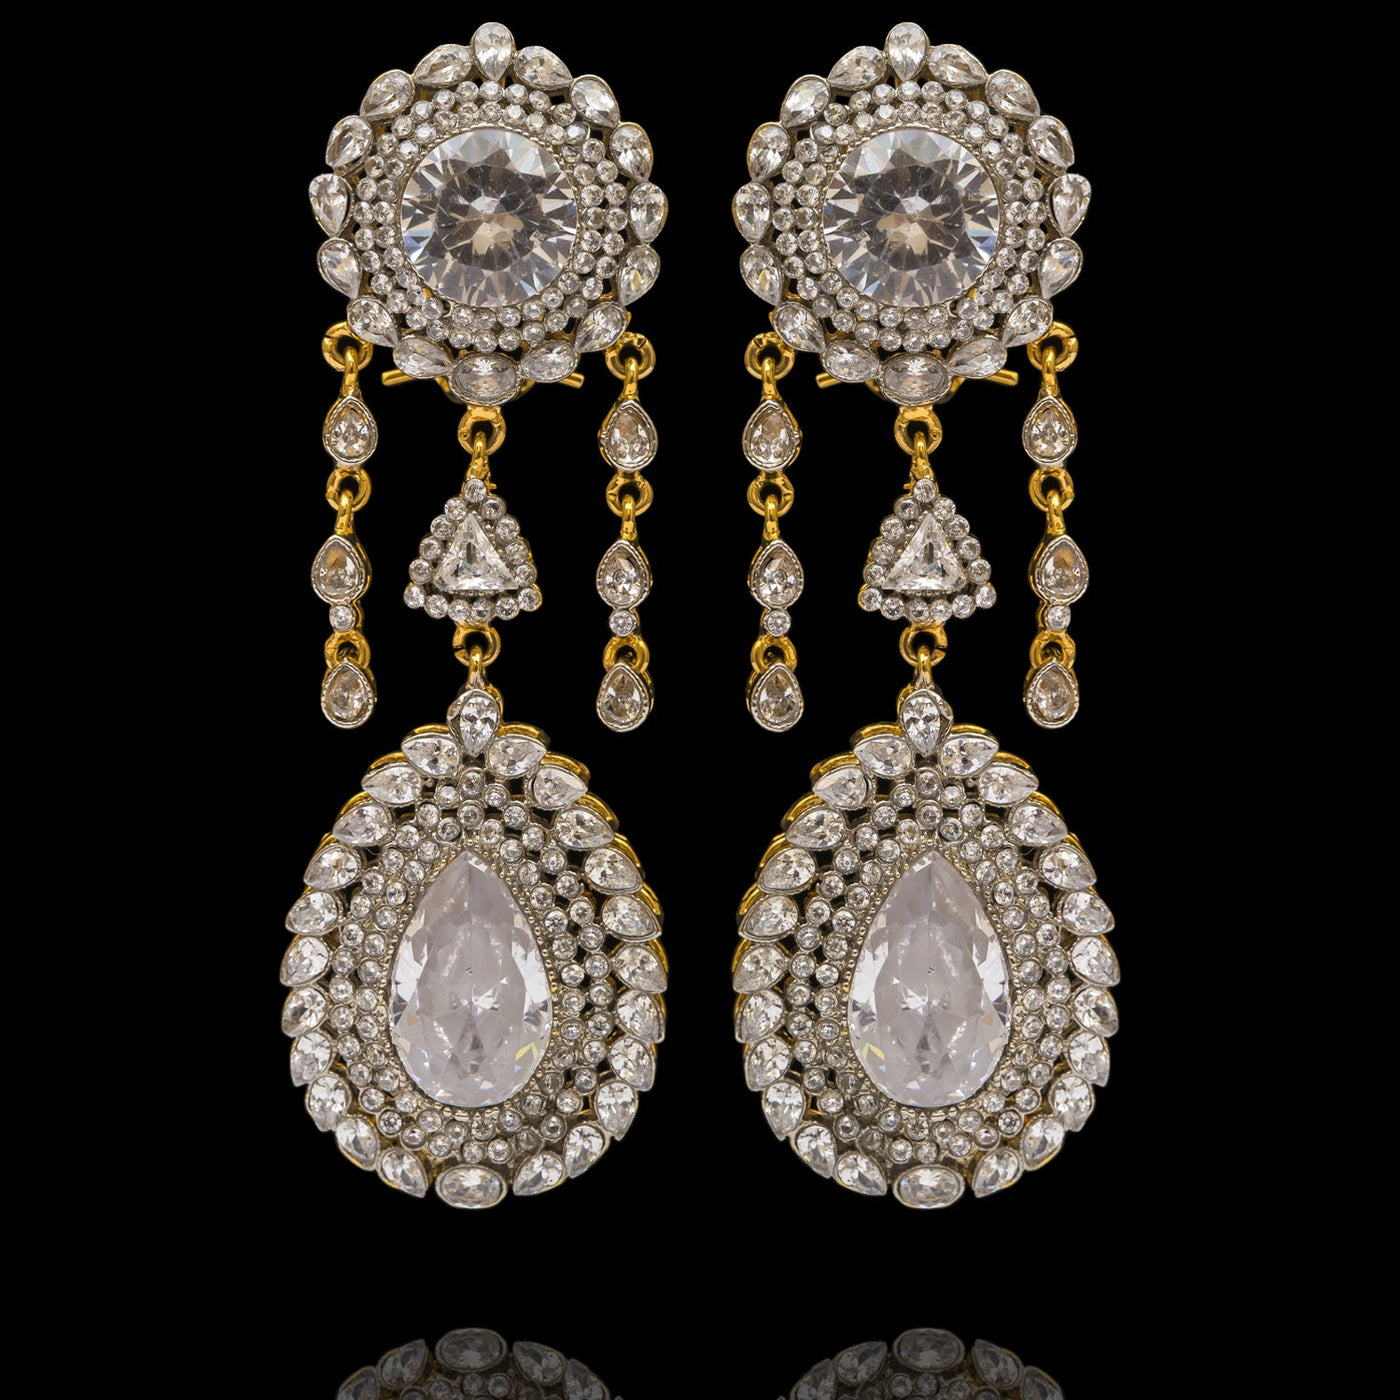 Walihah Earrings - Available in 2 Options